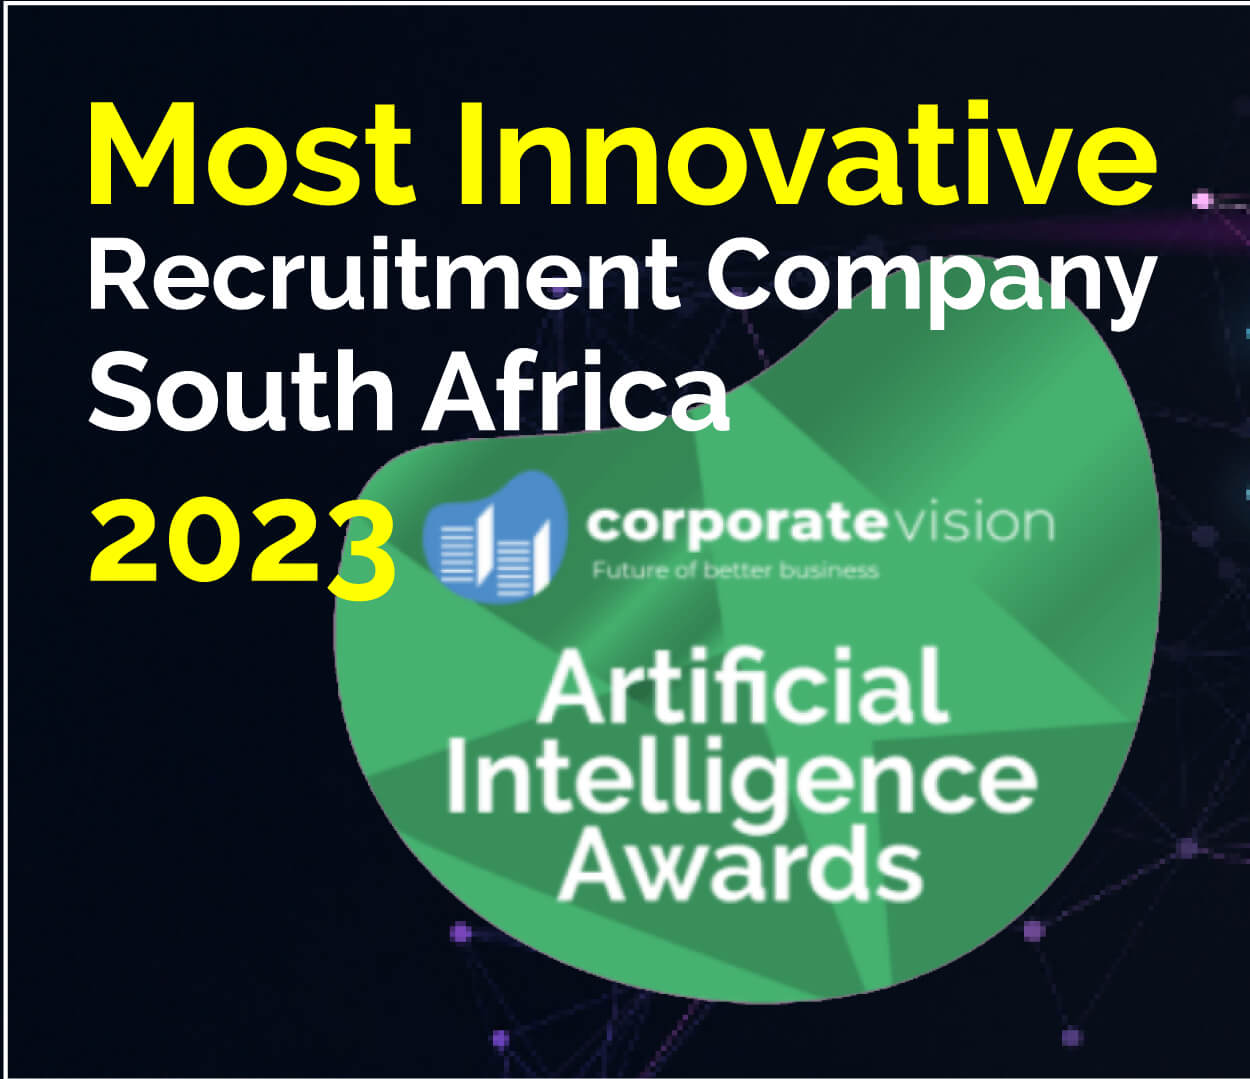 Job Crystal wins Most Innovative: Recruitment Company South Africa 2023: Artificial Intelligence Awards